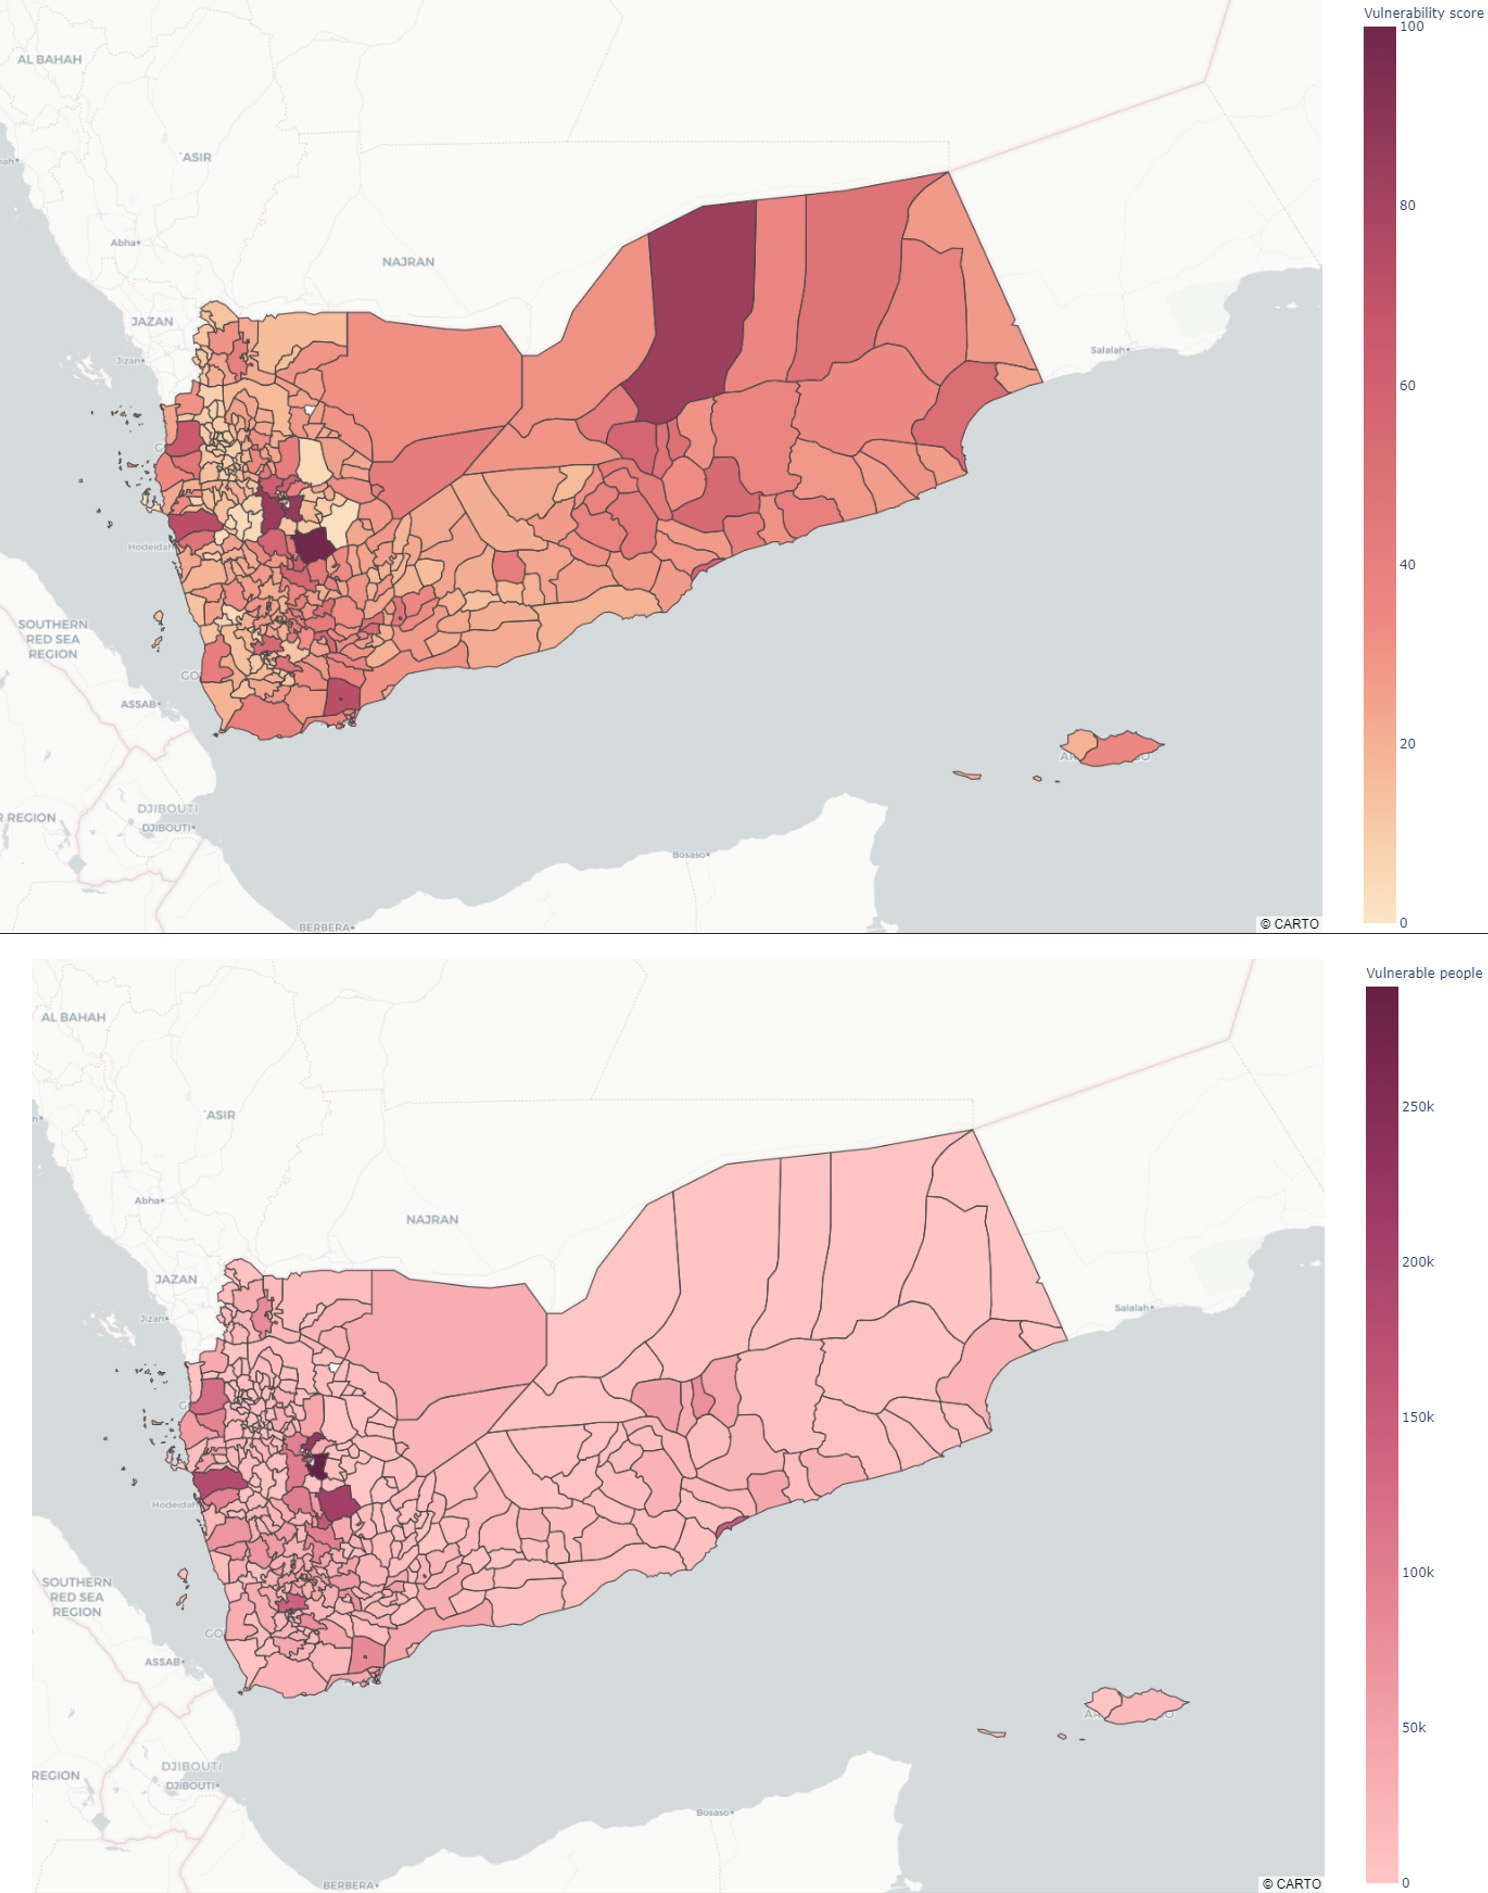 Vulnerability maps for Yemen: Vulnerability score in the top panel, vulnerable population in the lower panel.